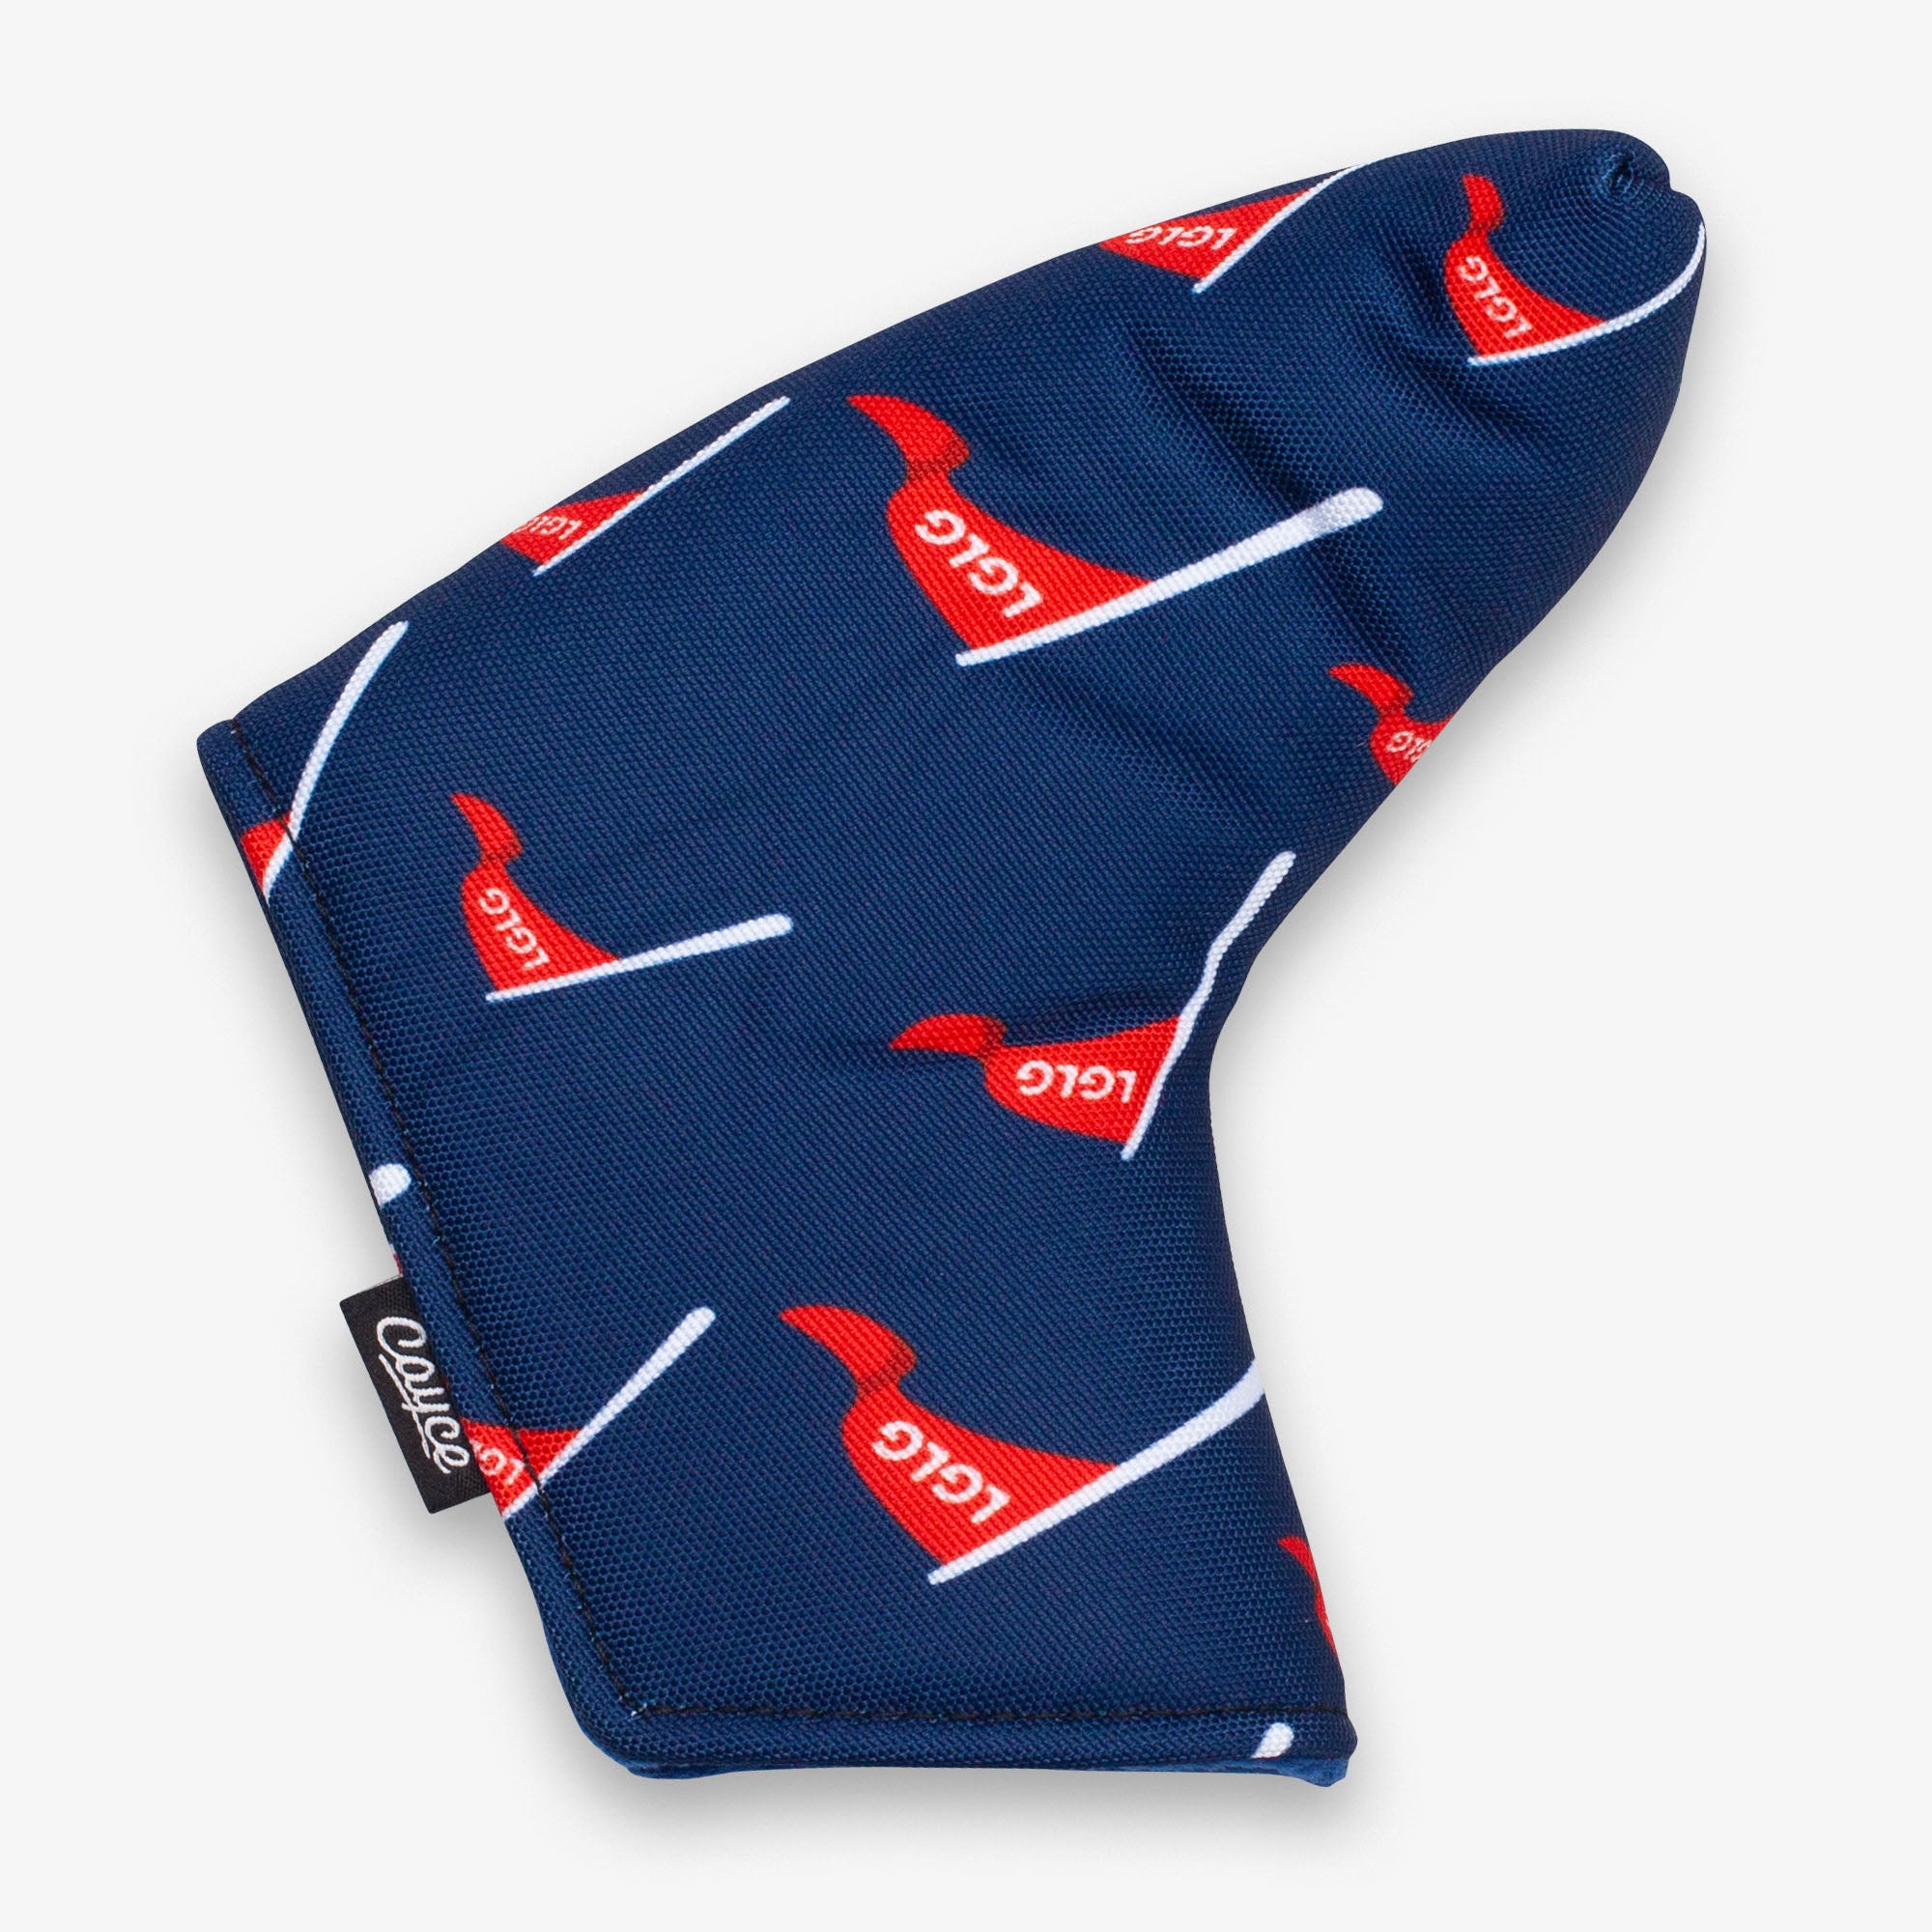 custom magnetic putter cover with printed design for the Chasing Scratch Podcast featuring a navy base, navy liner, and dancing red LGLG flags from Cayce Golf